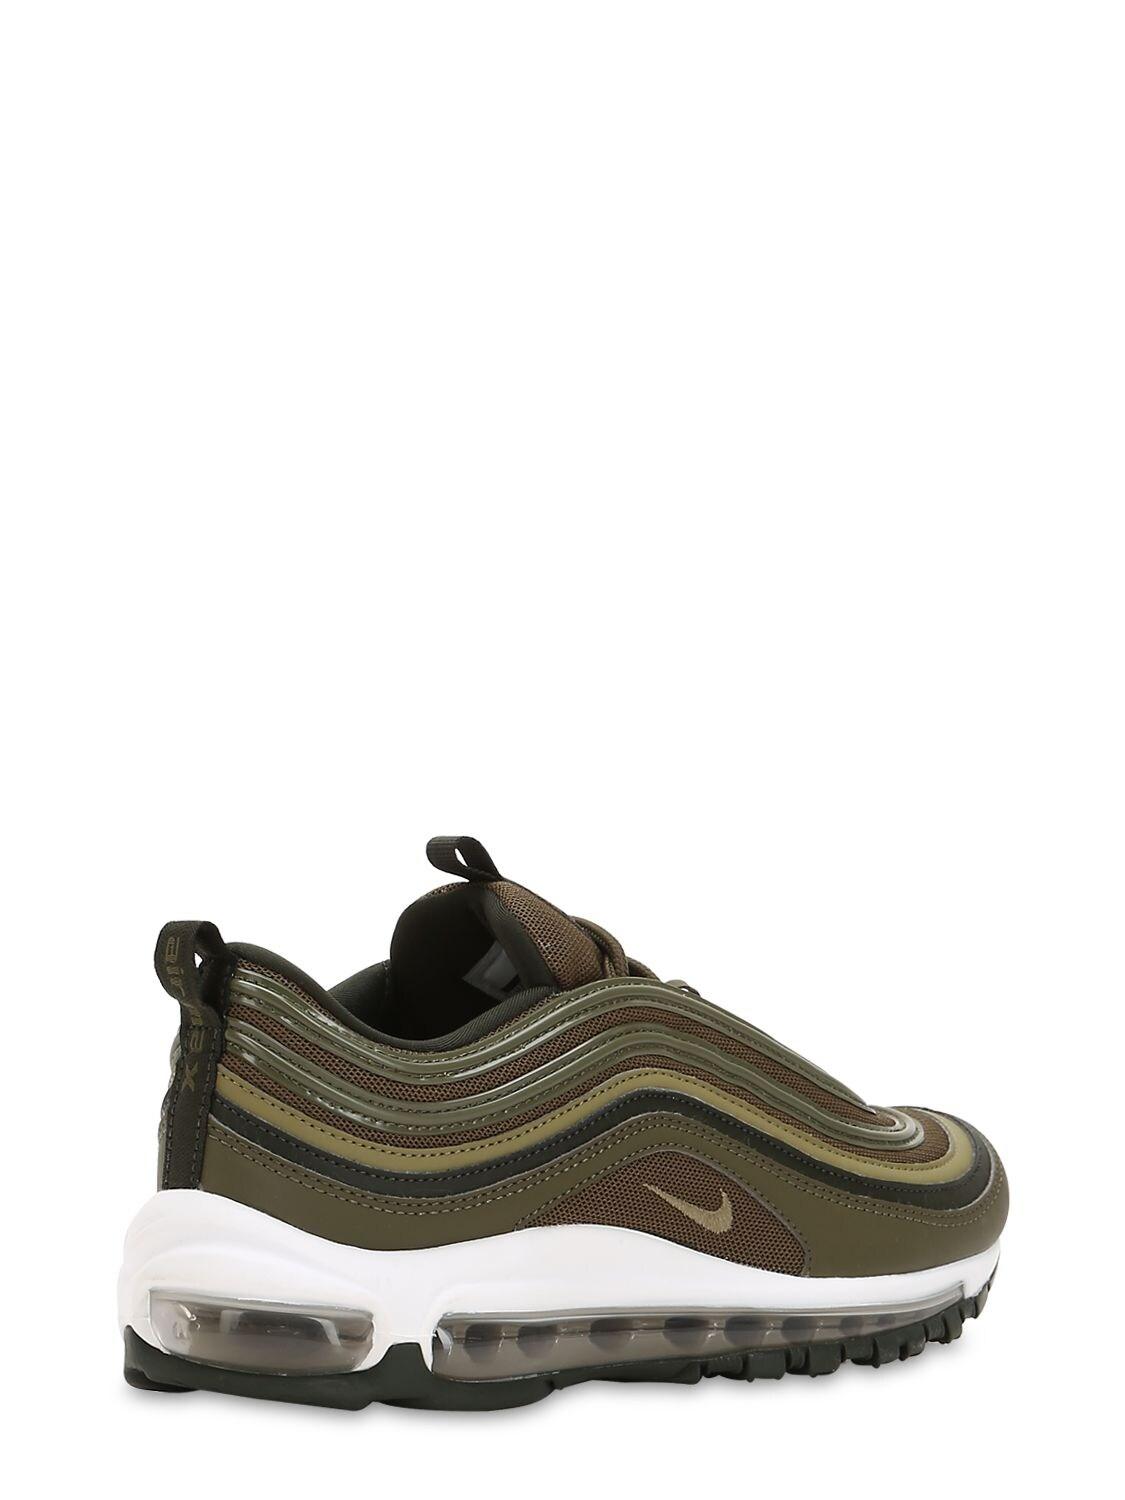 Nike Air Max 97 Verde Militare Cheapest Prices, 48% OFF | maikyaulaw.com